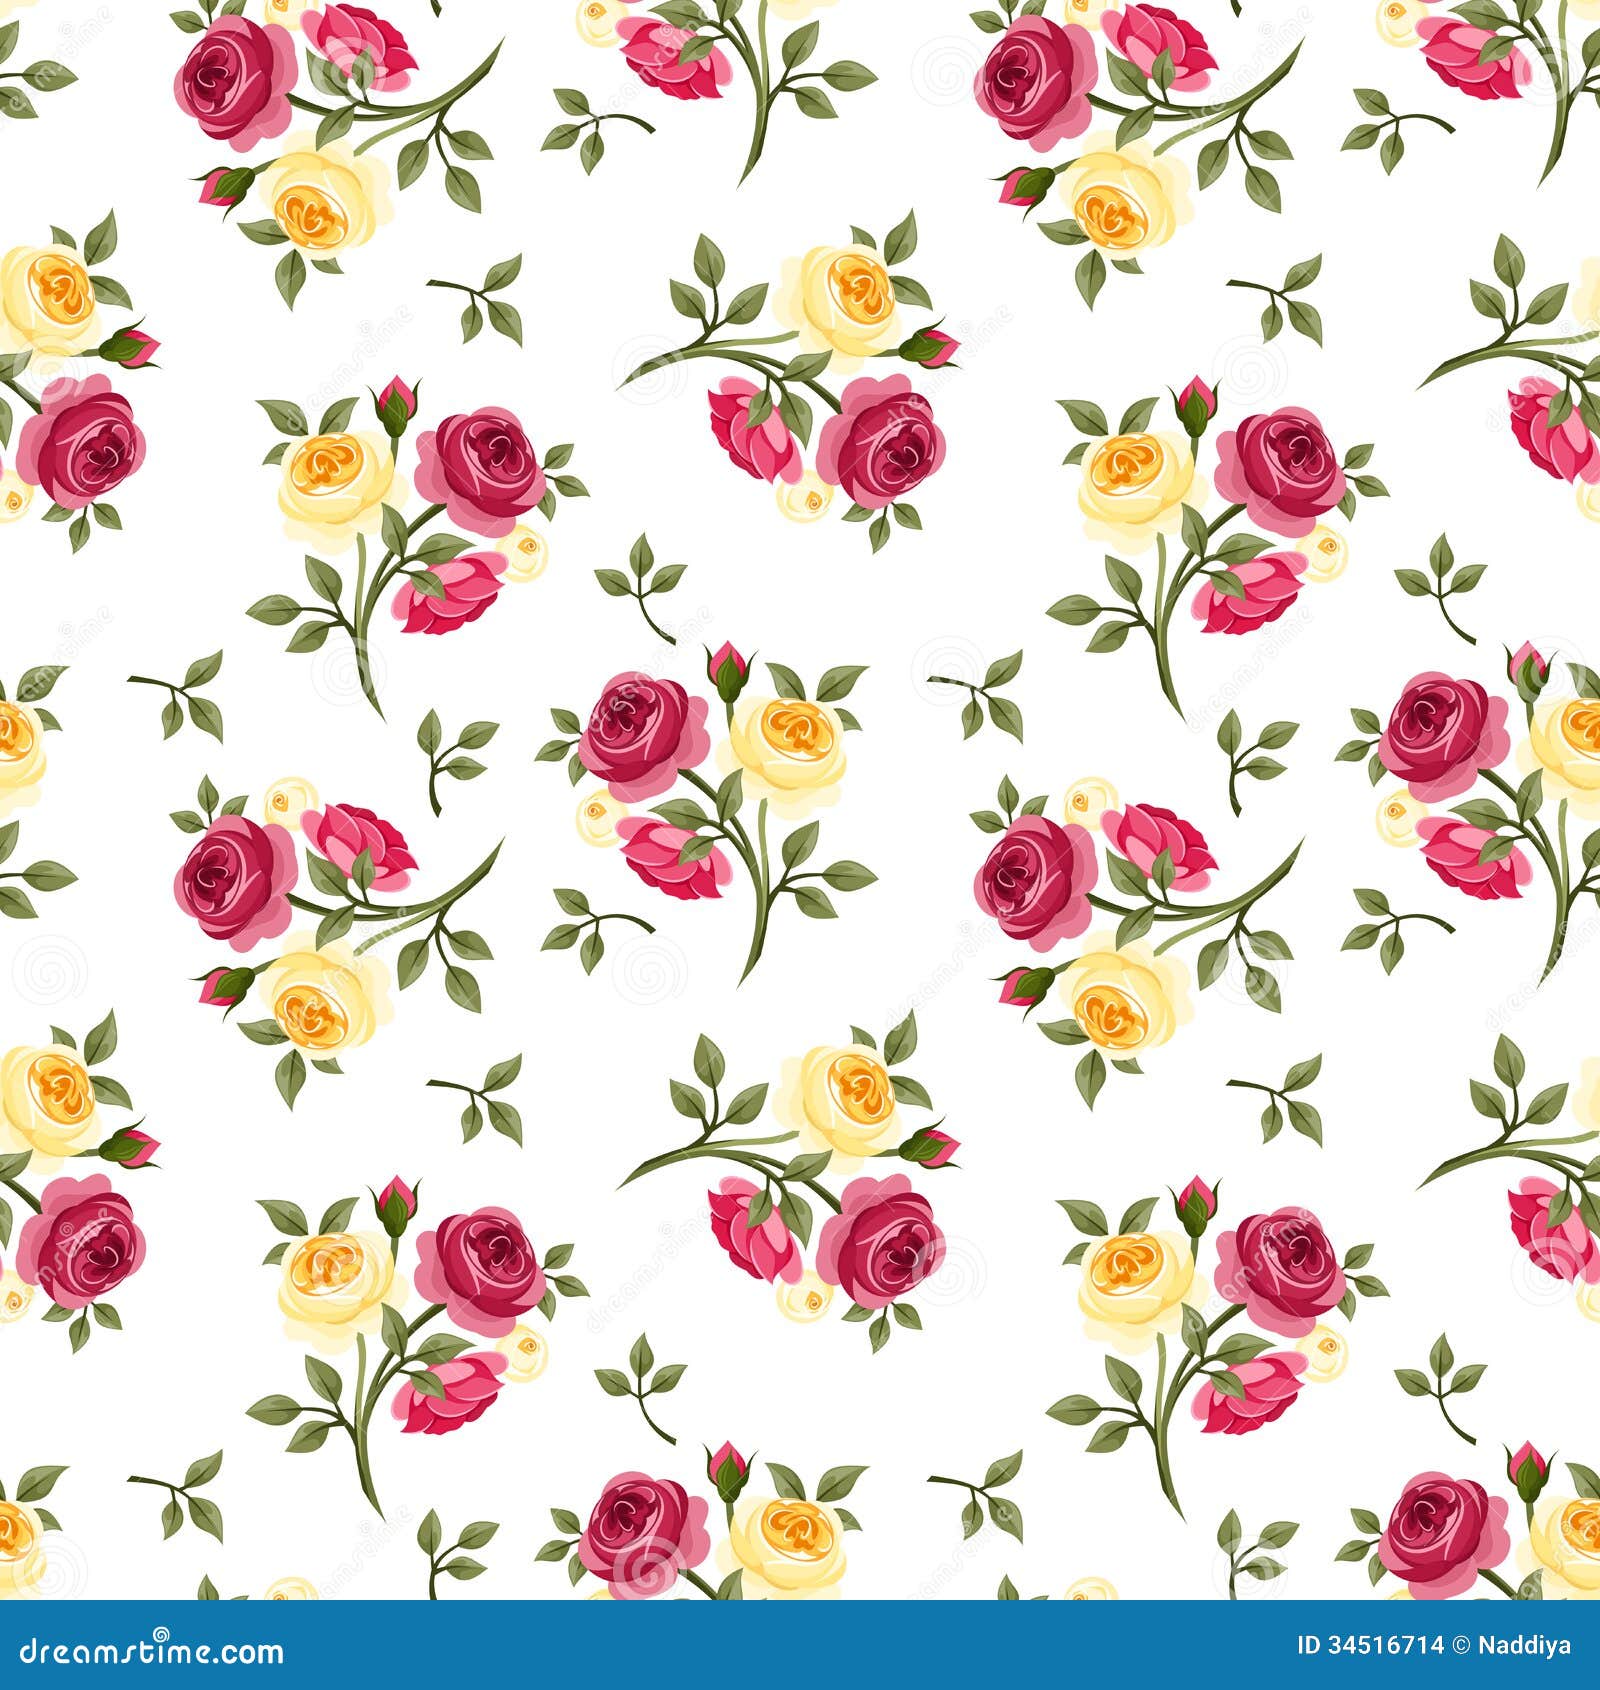 Berries W1050 Red & Yellow Roses w/ Leaves Floral Andover Wallpaper Roll 